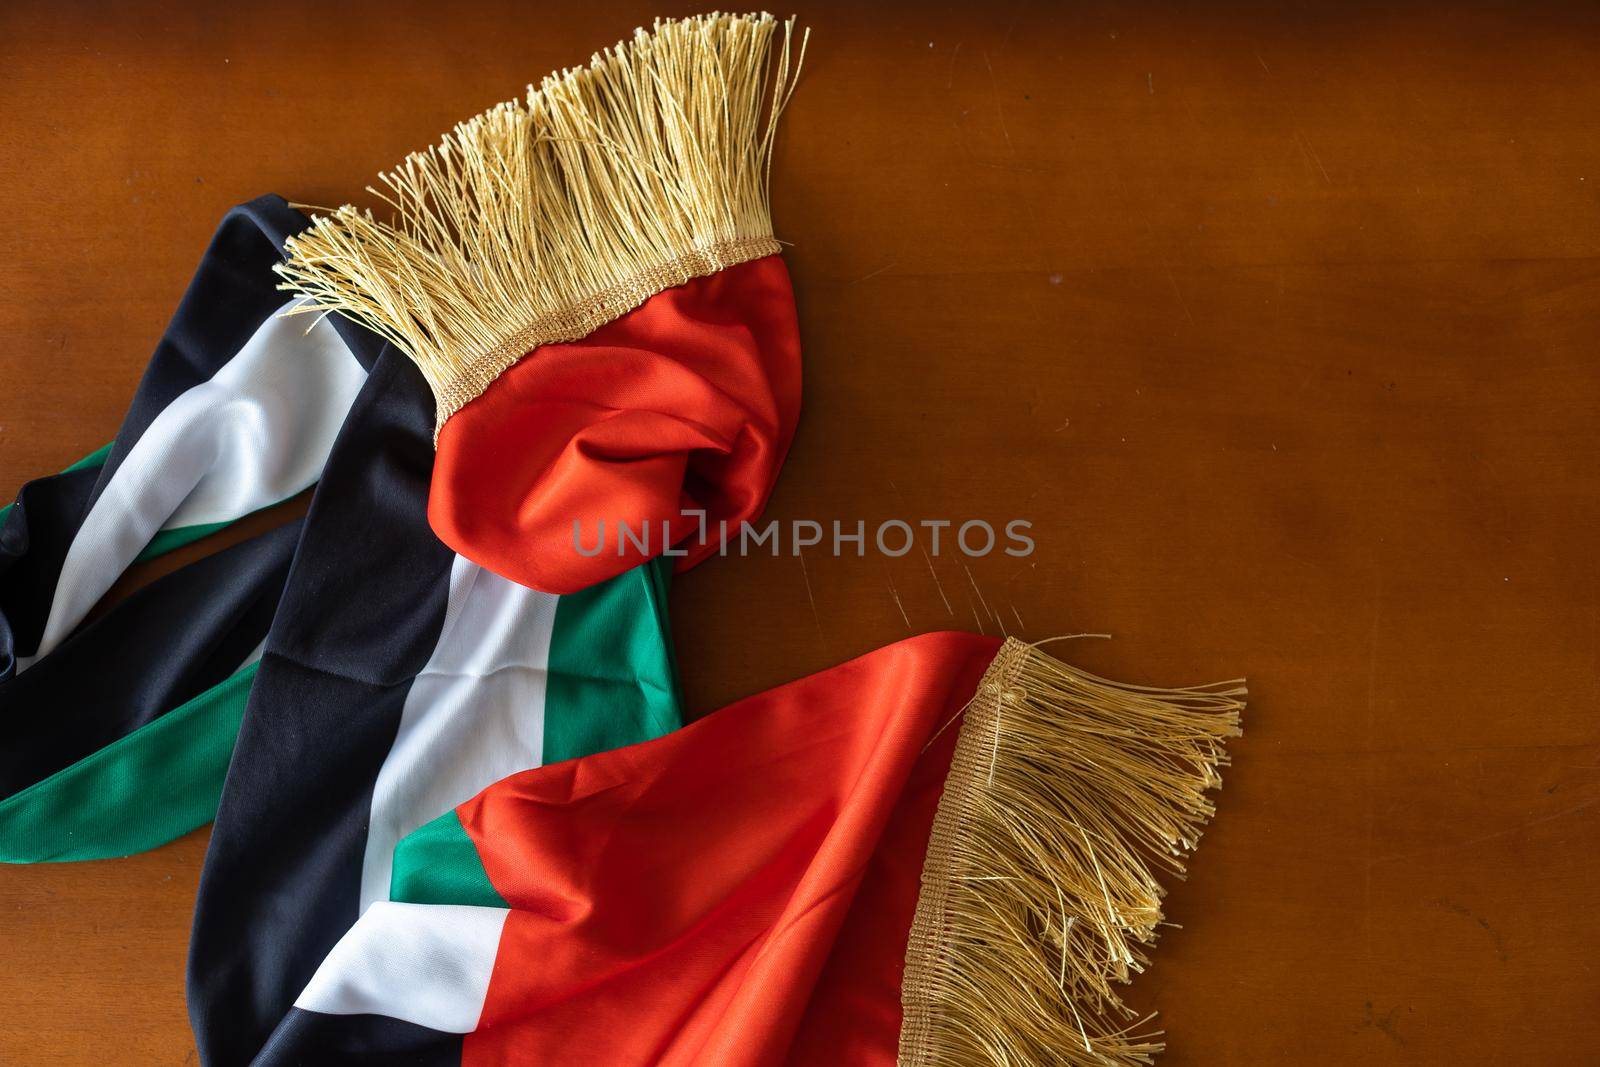 waving fabric texture of the flag with color of united arab emirates, uae real texture flag